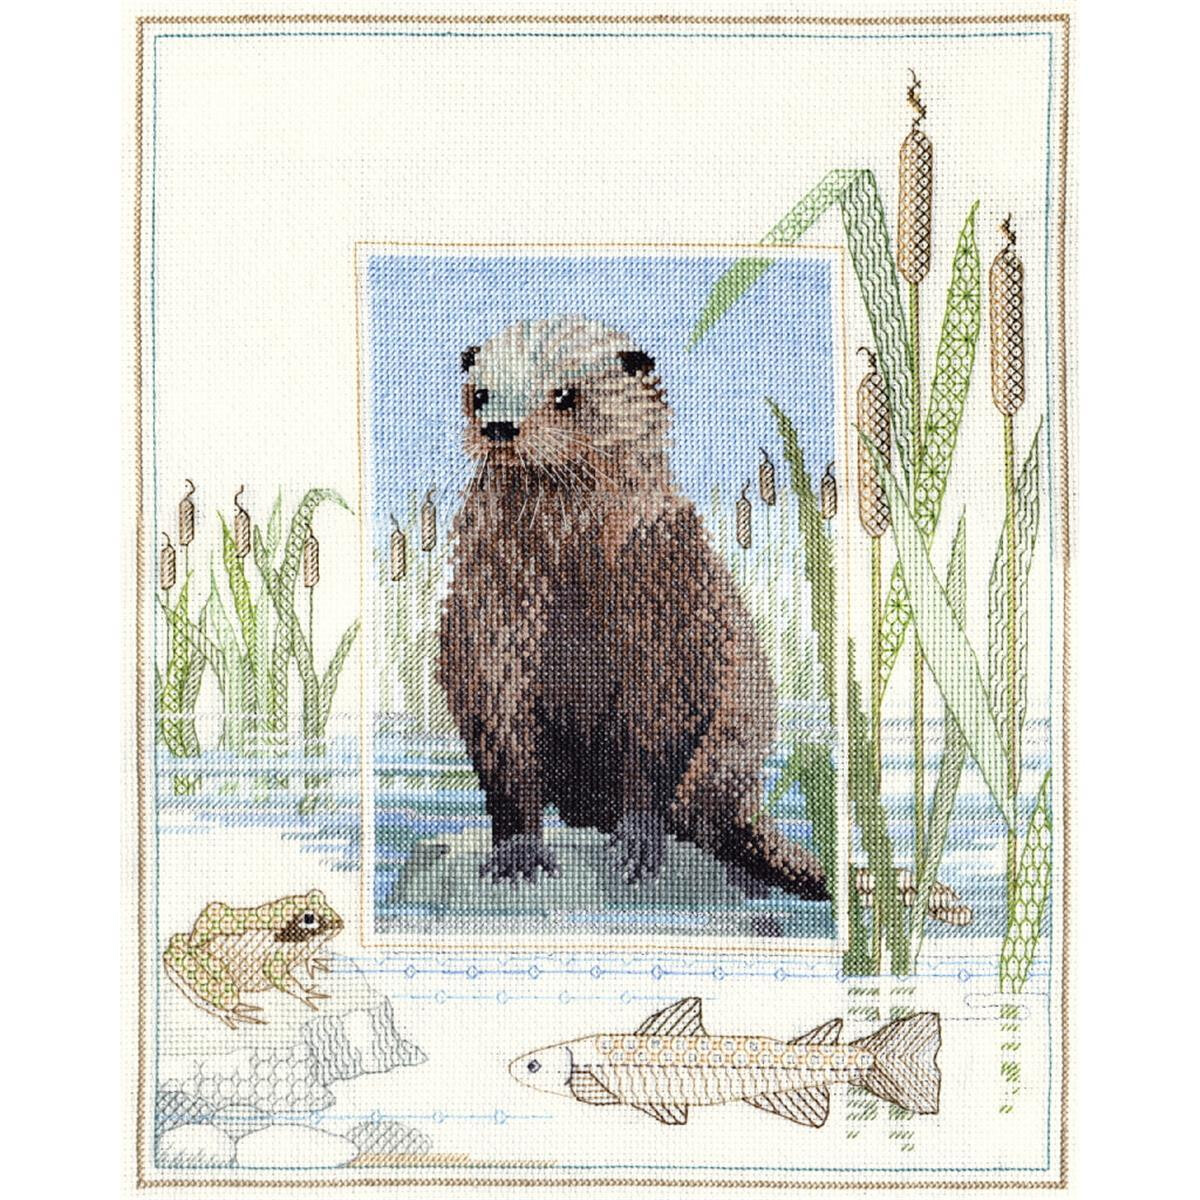 An embroidery pack from Bothy Threads shows an otter...